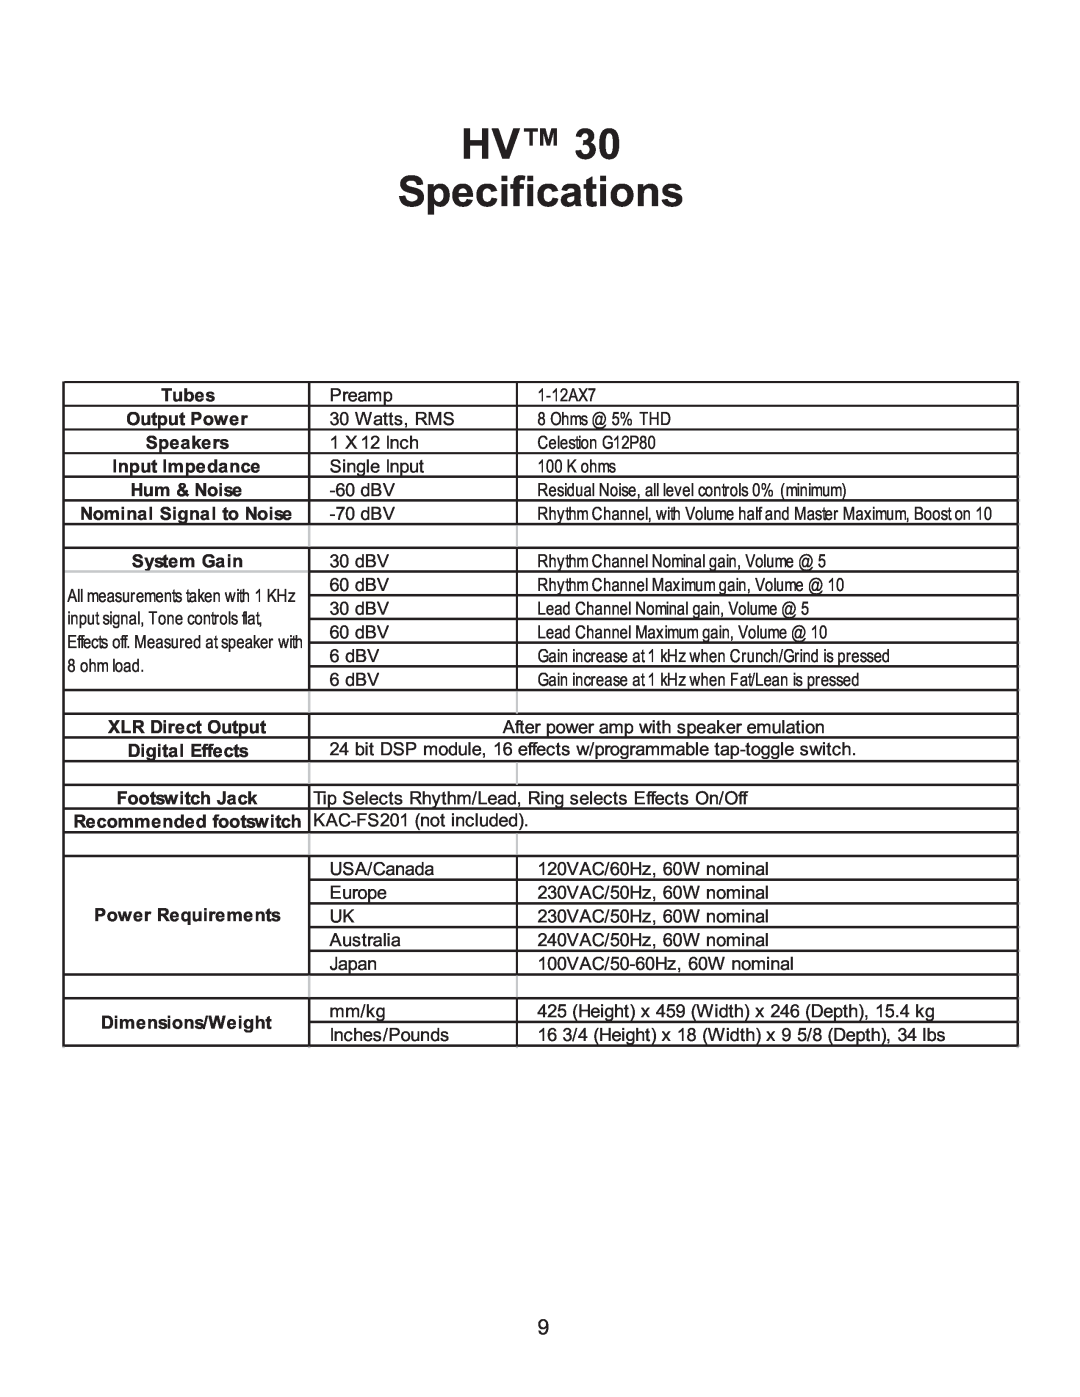 Kustom HV 30 owner manual HV Specifications, Tubes, Power Requirements 